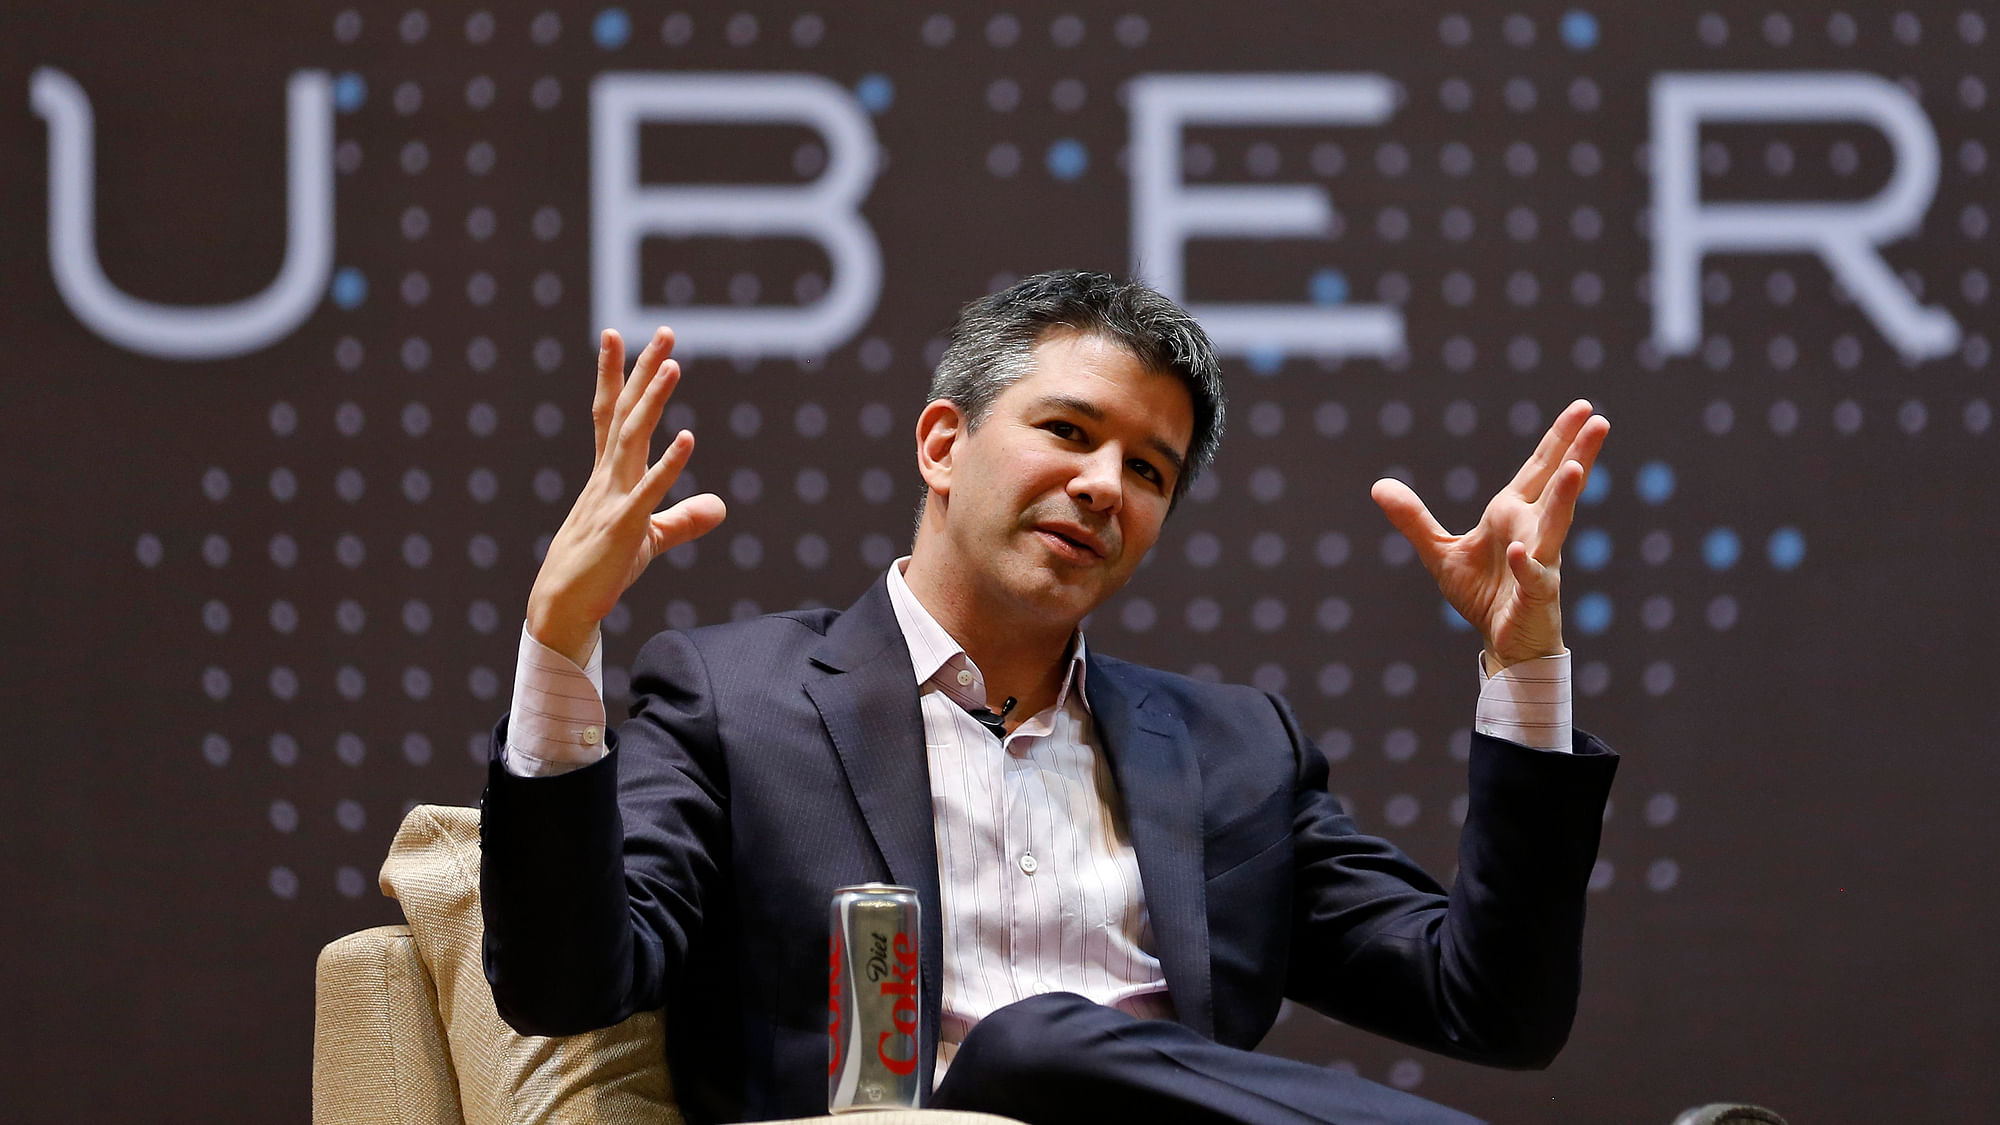 Travis Kalanick, CEO, Uber speaking to students recently. (Photo: Reuters)